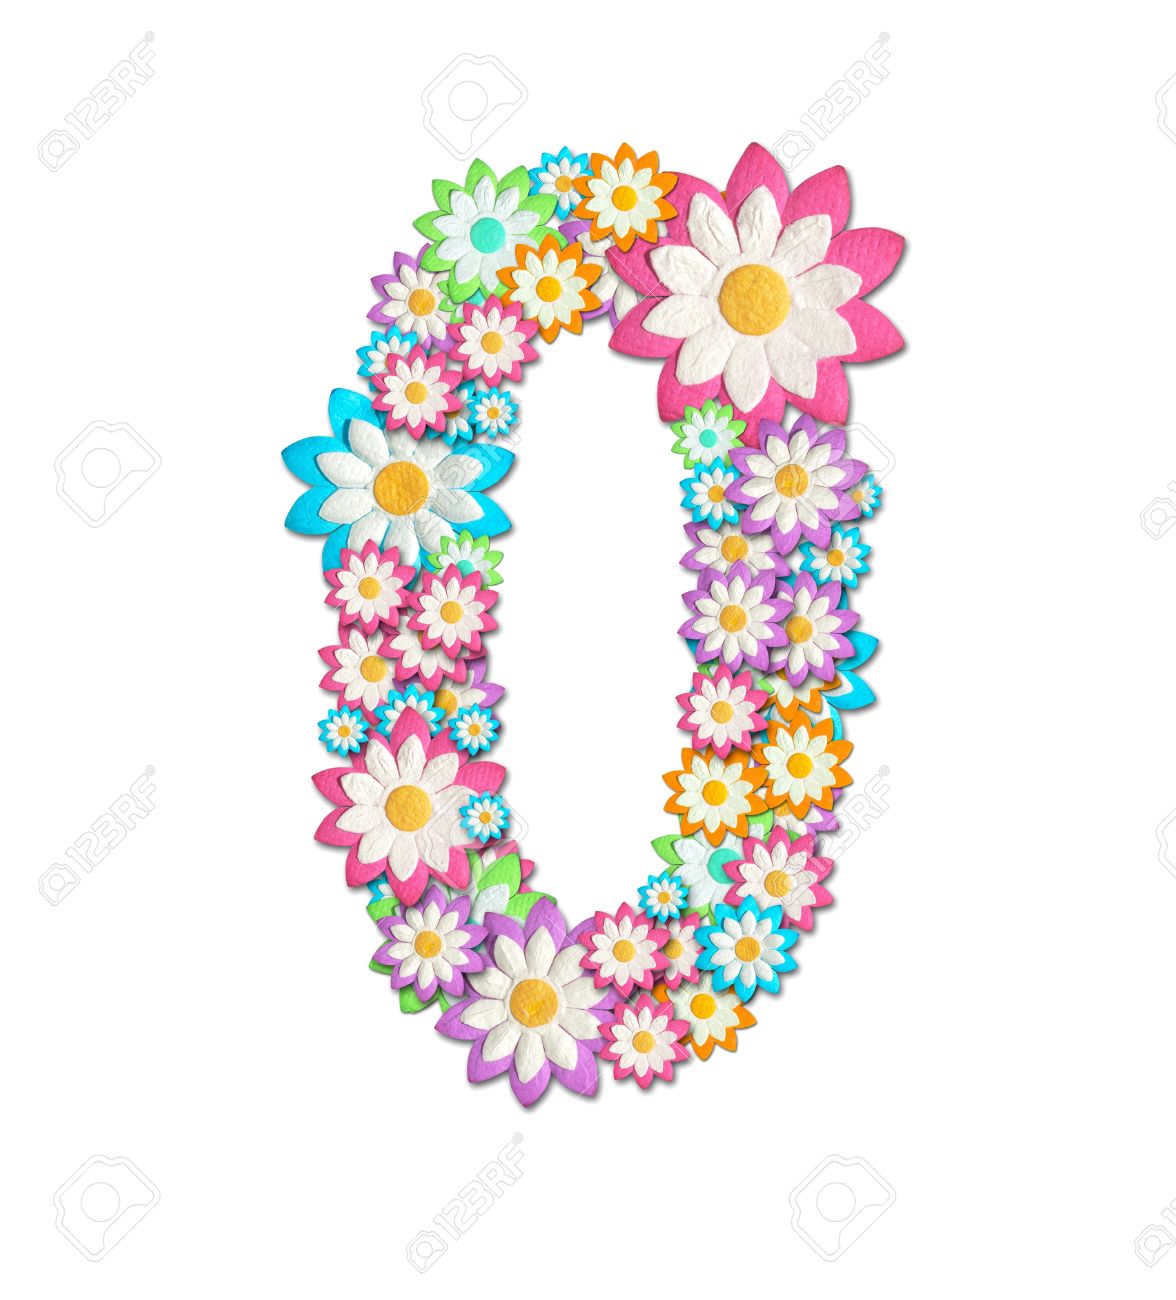 Number Create From Flower Isolated On White Background Stock